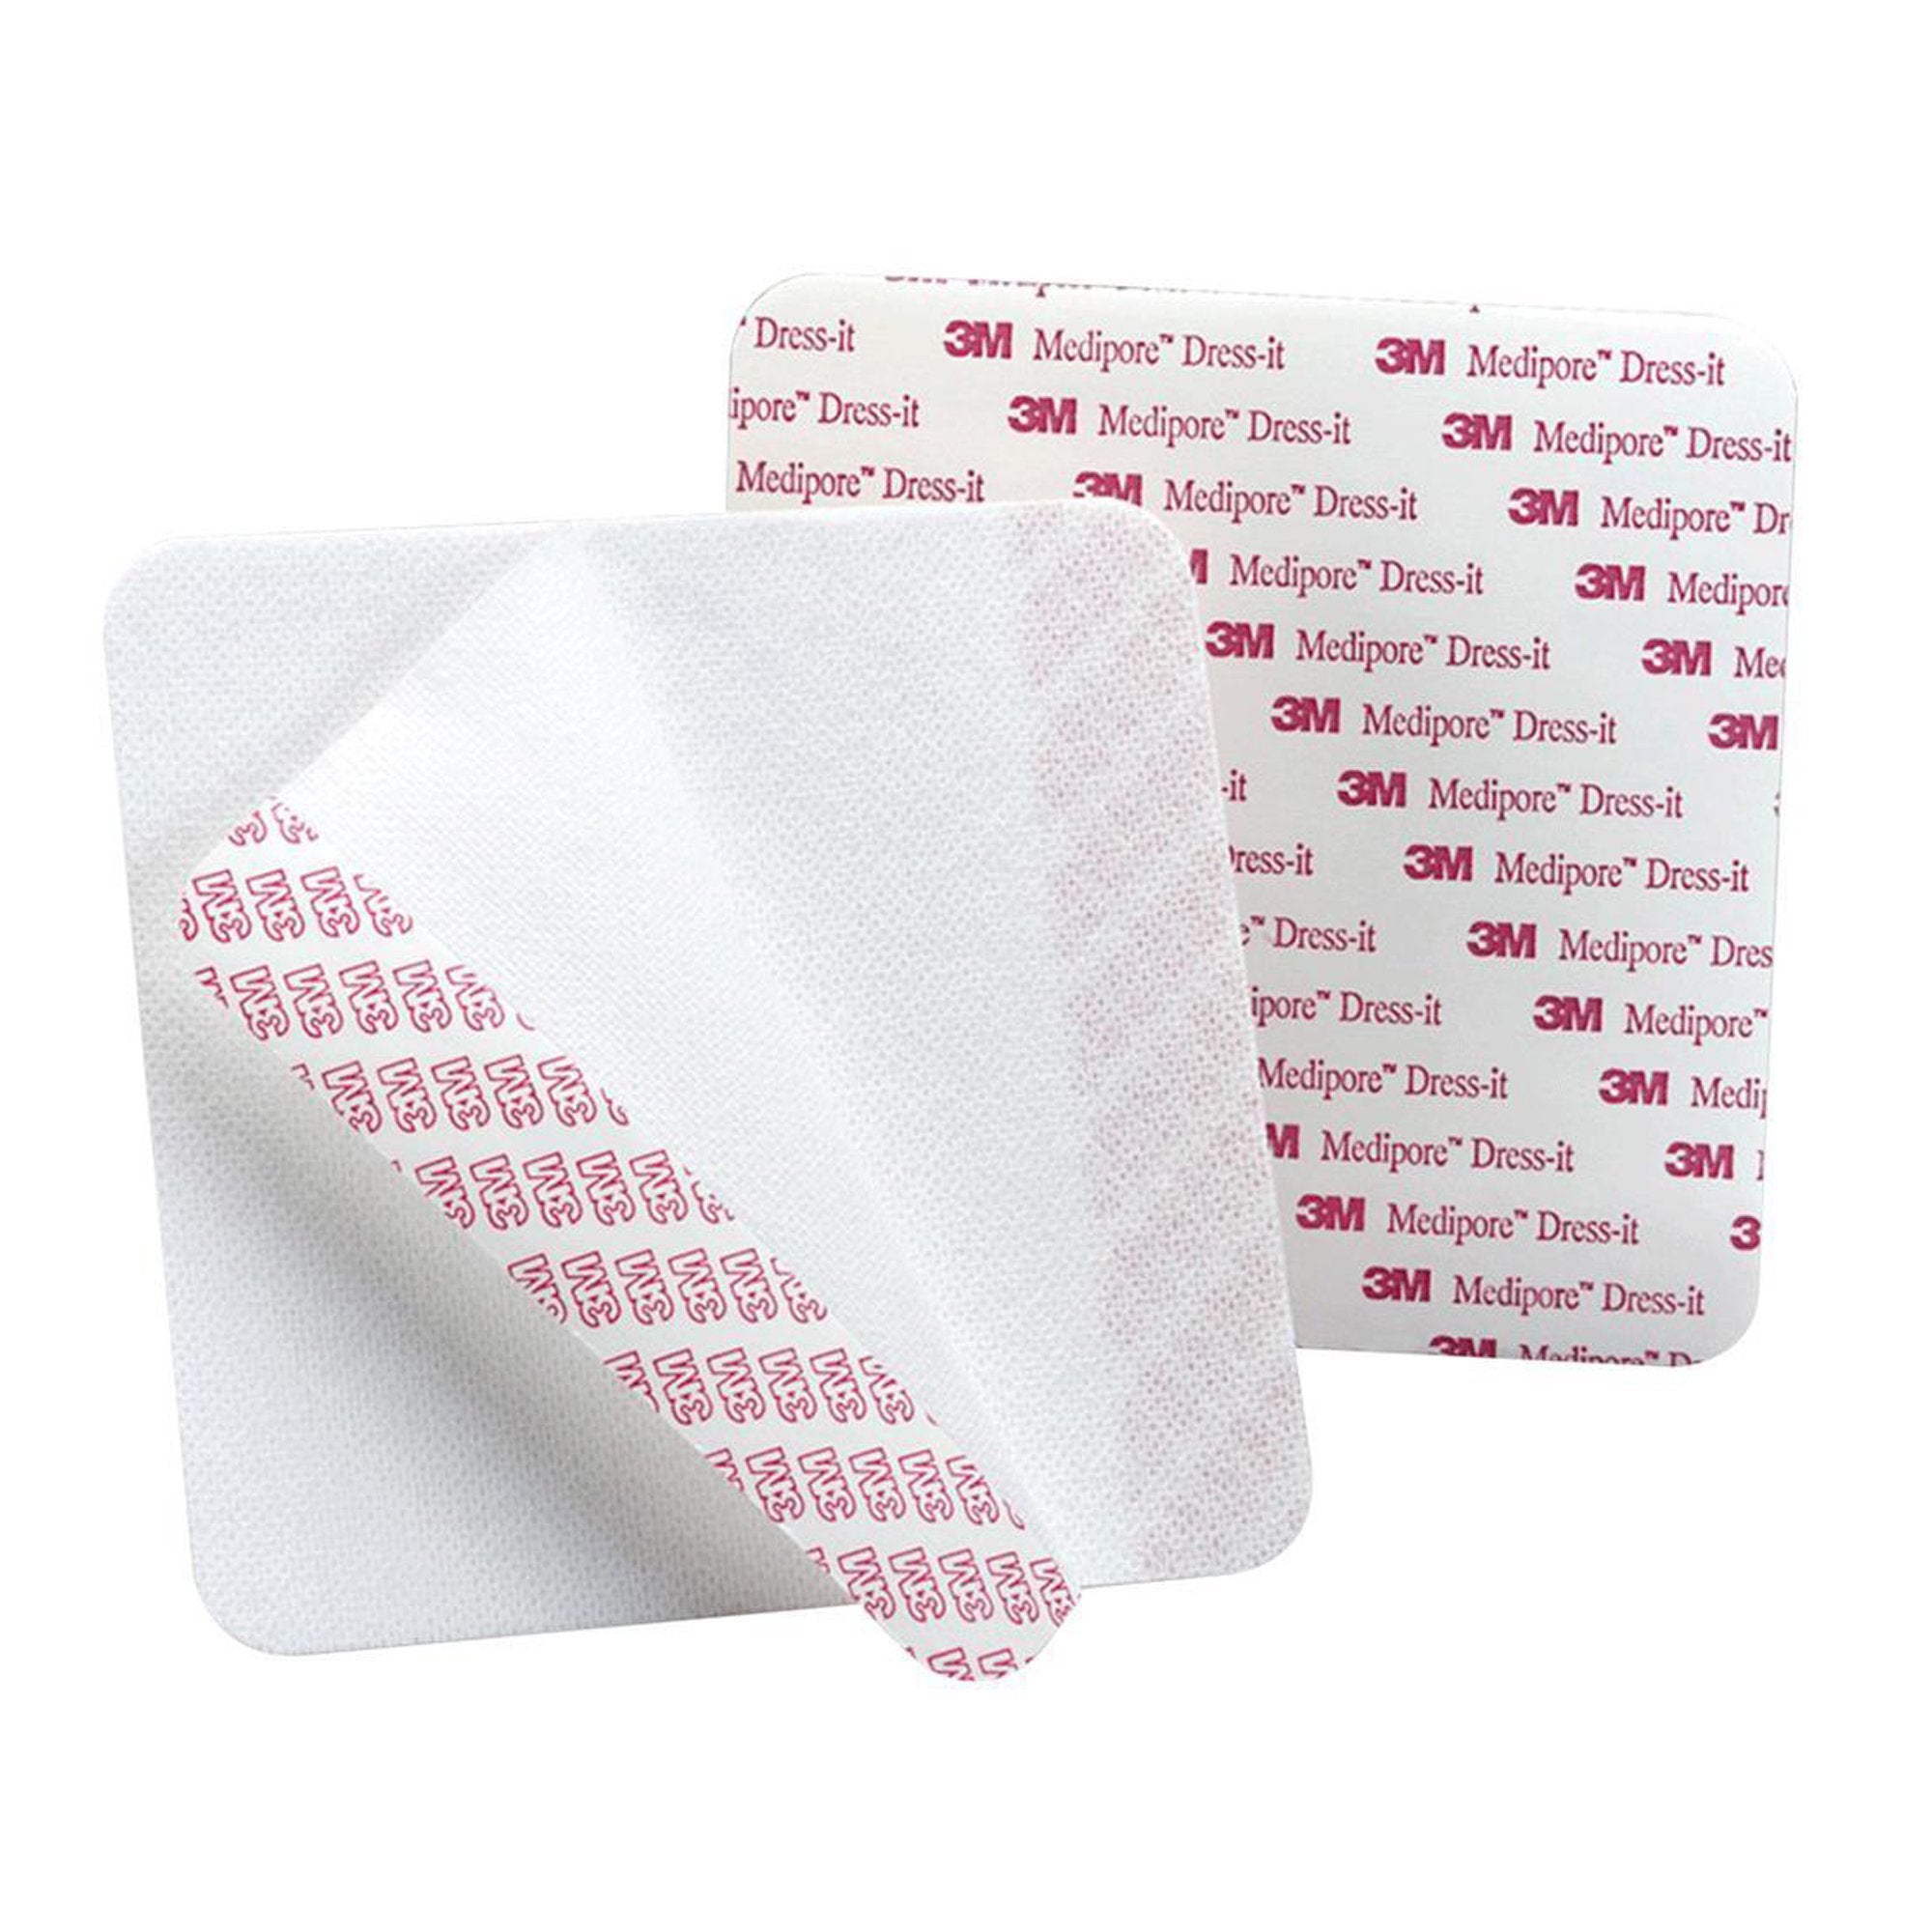 Dressing Retention Tape with Liner 3M™ Medipore™ Dress-It White 3-7/8 X 4-5/8 Inch Soft Cloth NonSterile